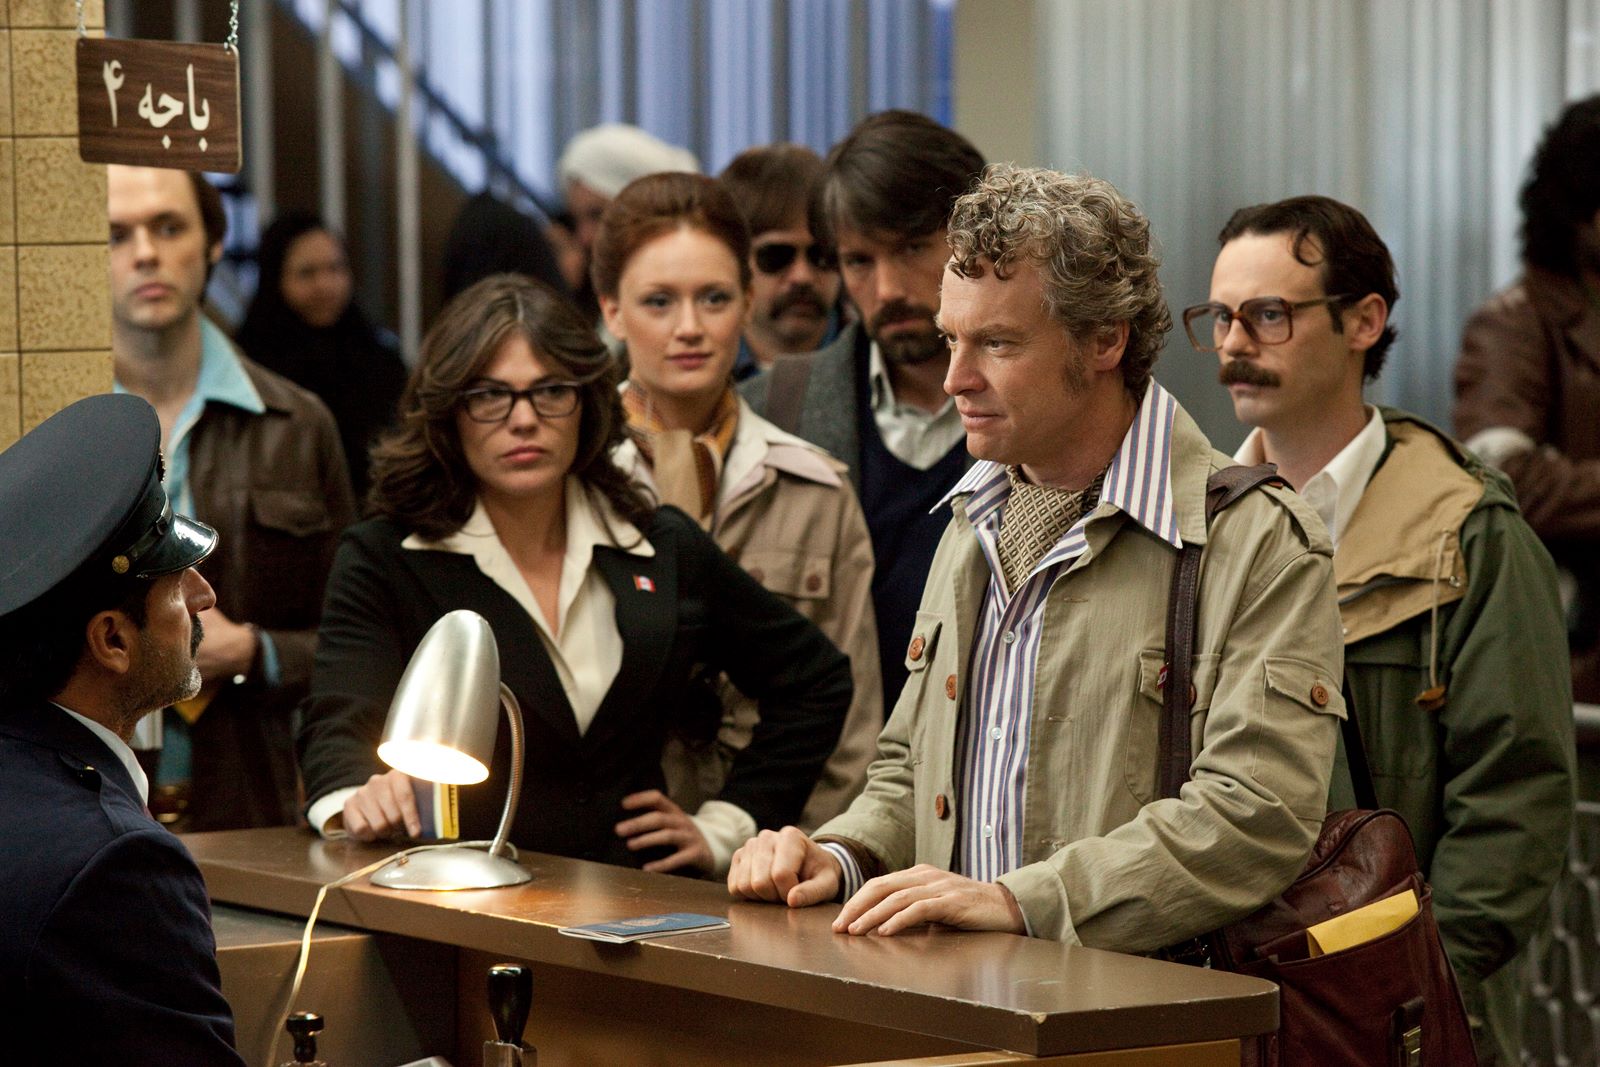 Ben-Affleck-Tate-Donovan-and-Scoot-McNairy-in-Argo